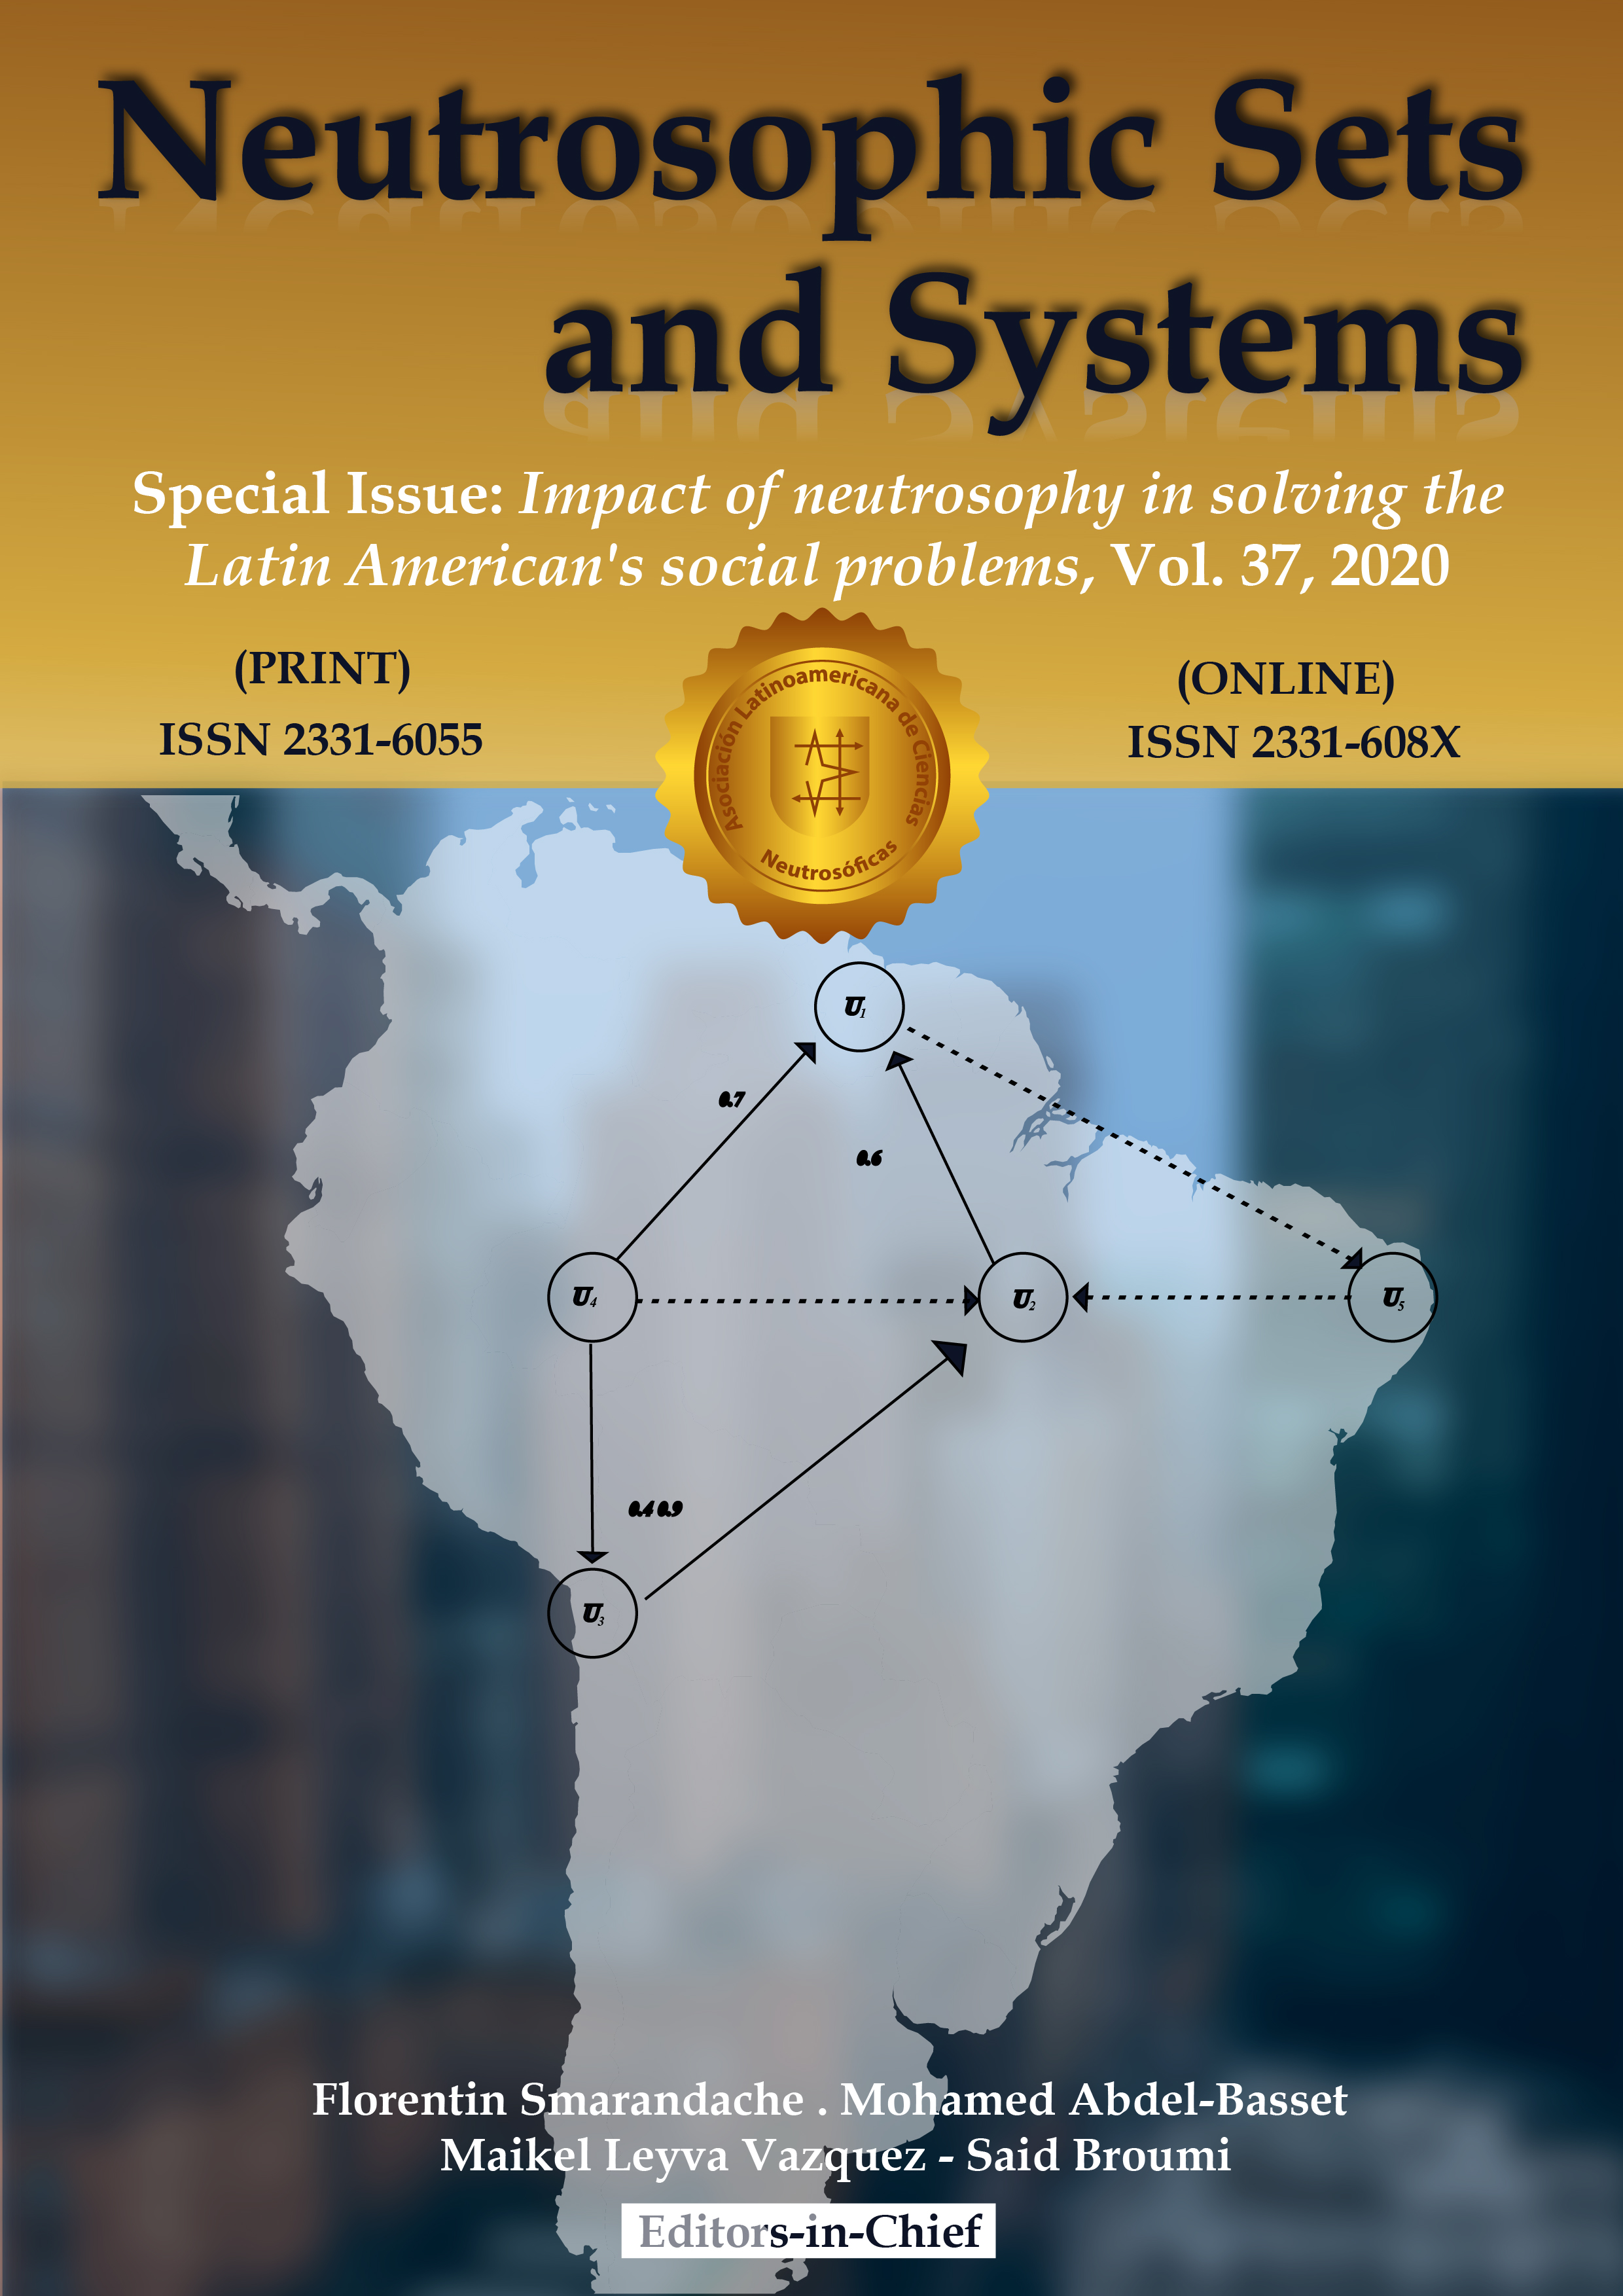 					View Vol. 37 (2020): Neutrosophic Sets and Systems, {Special Issue: Impact of neutrosophy in solving the Latin American's social problems}
				